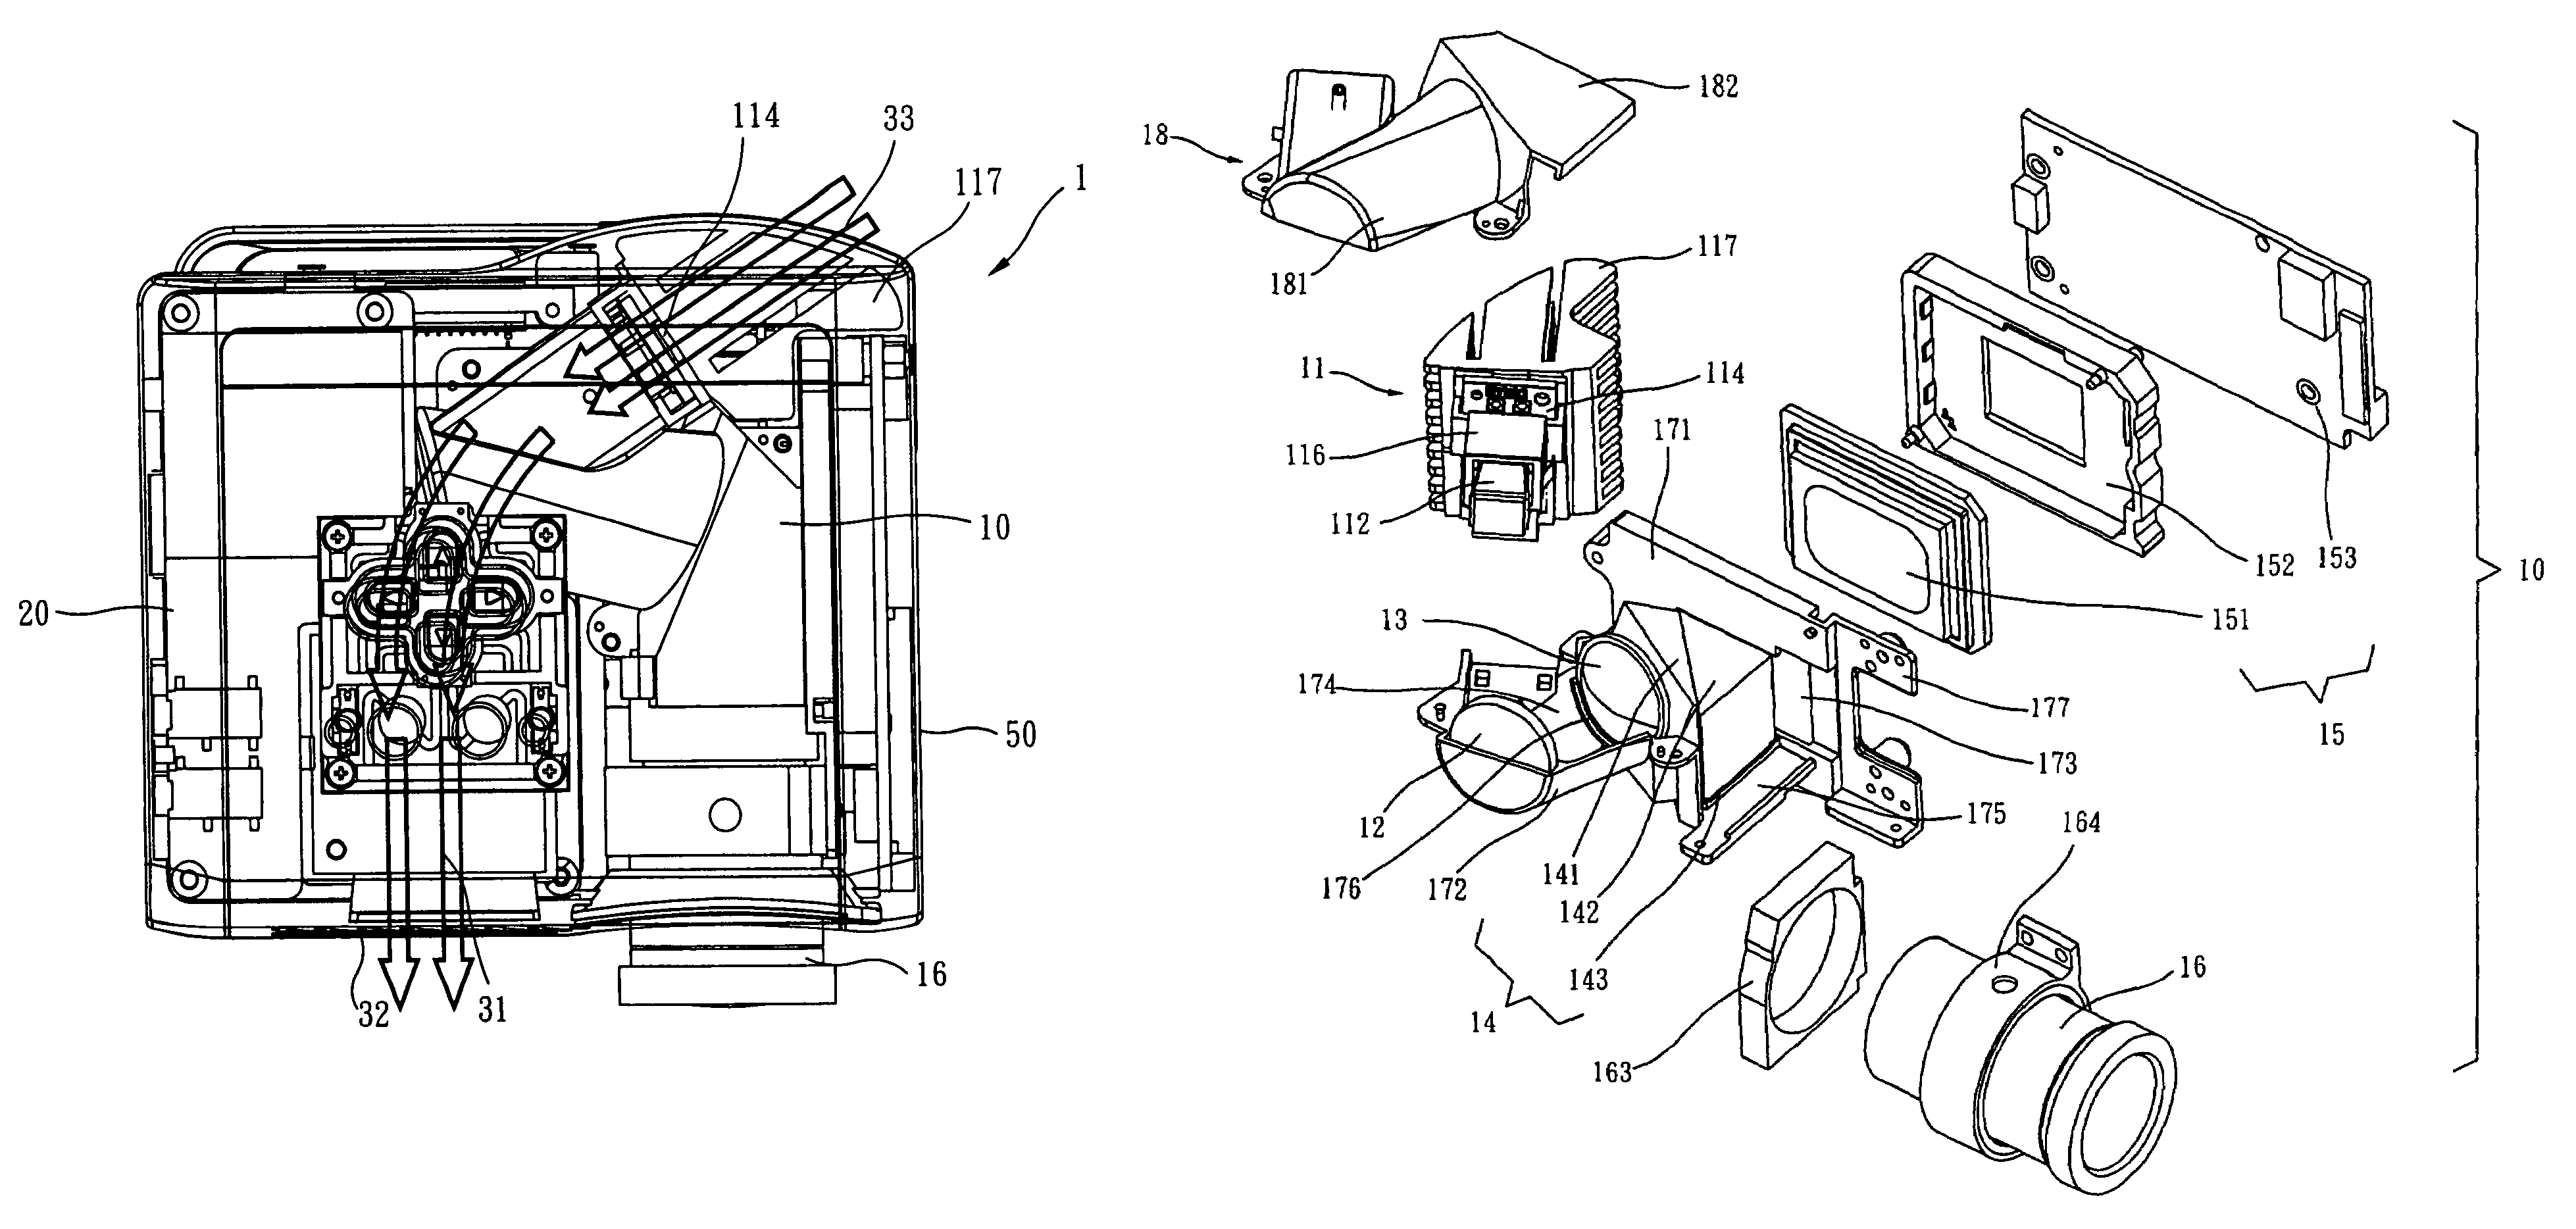 Image projector having a LED light source